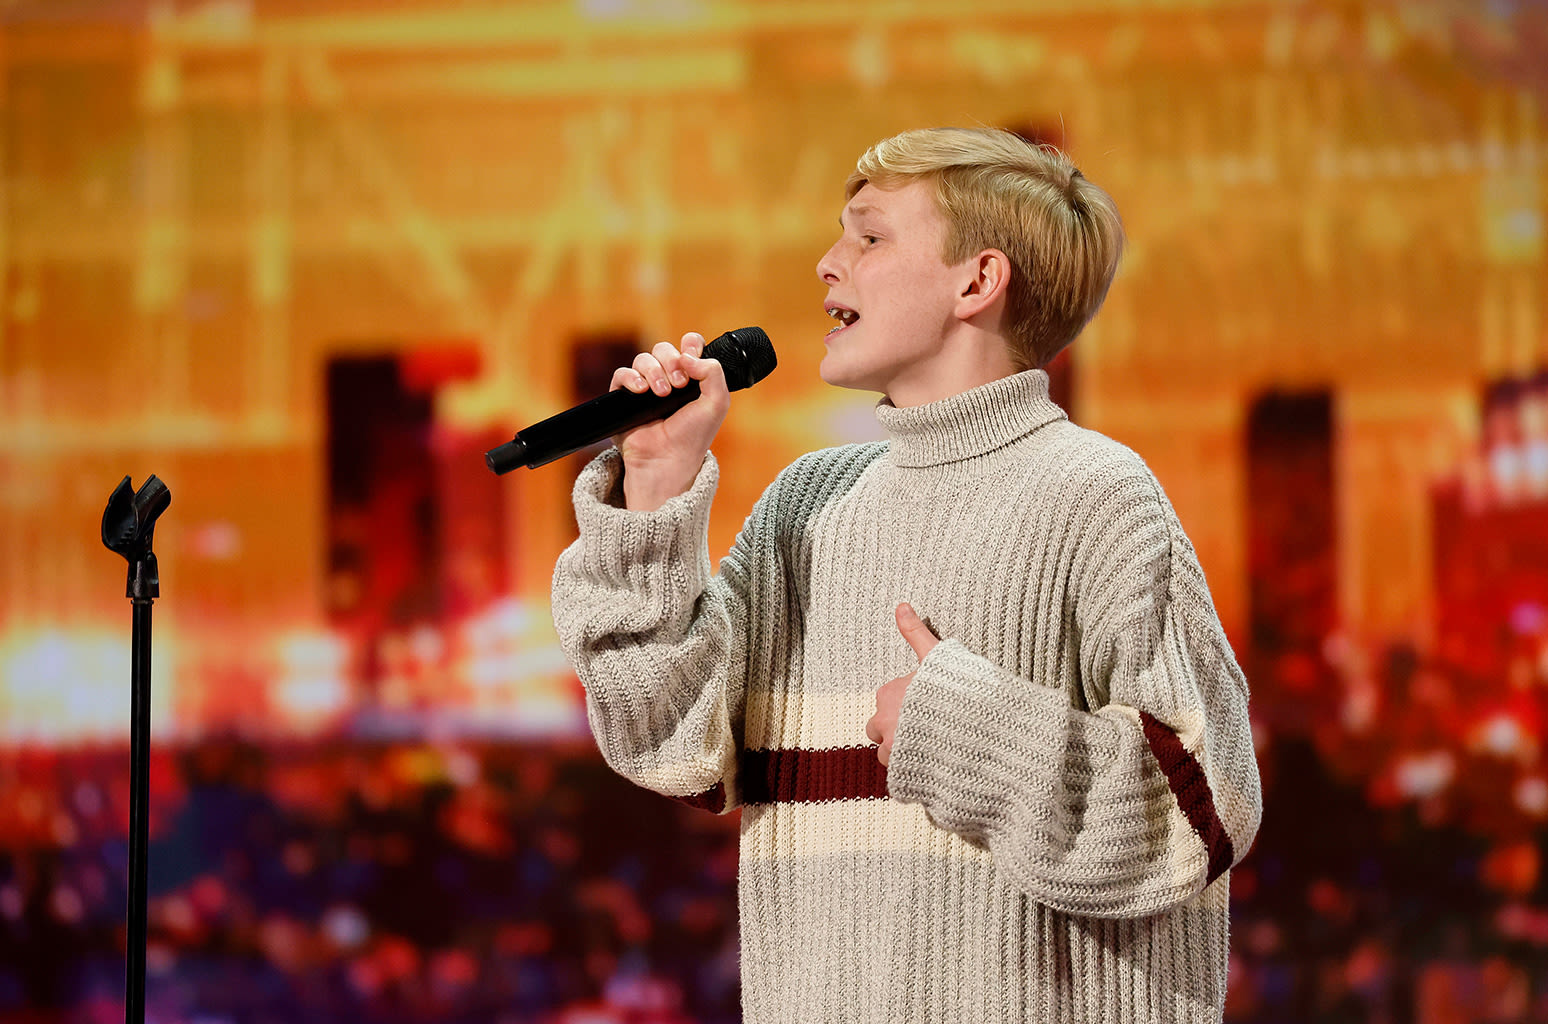 Watch 14-Year-Old’s Powerful Cover of Lesley Gore’s ‘You Don’t Own Me’ on ‘America’s Got Talent’